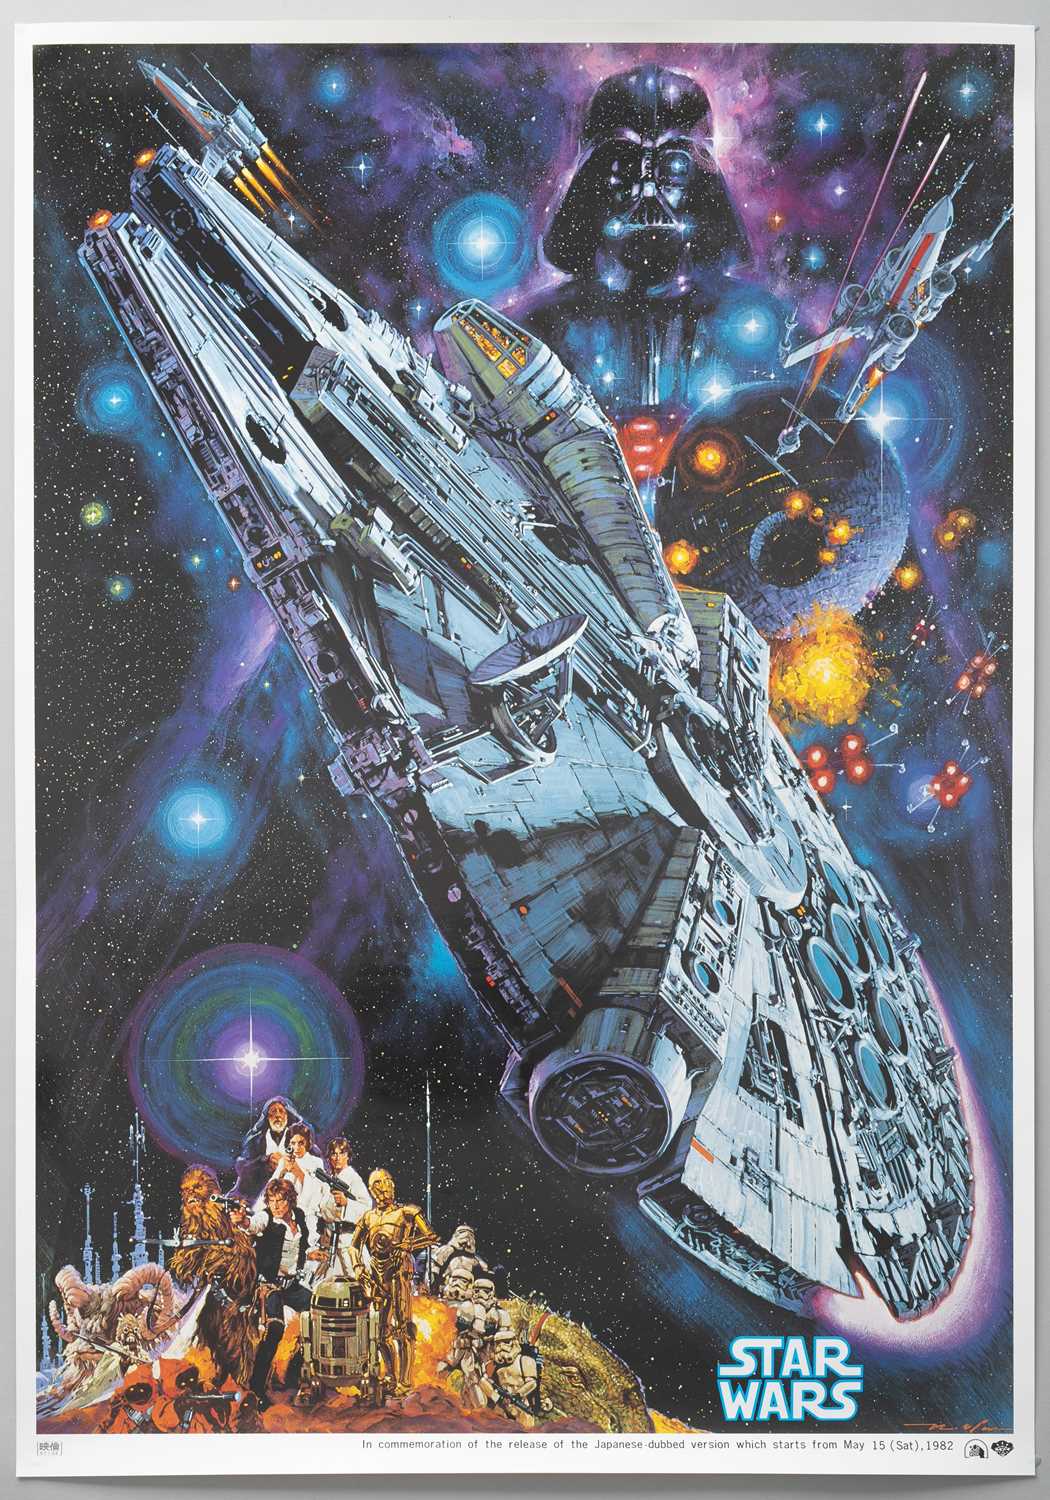 A JAPANESE STAR WARS POSTER SHOWA ERA, 1982 Featuring paintings of the main characters in Star Wars: